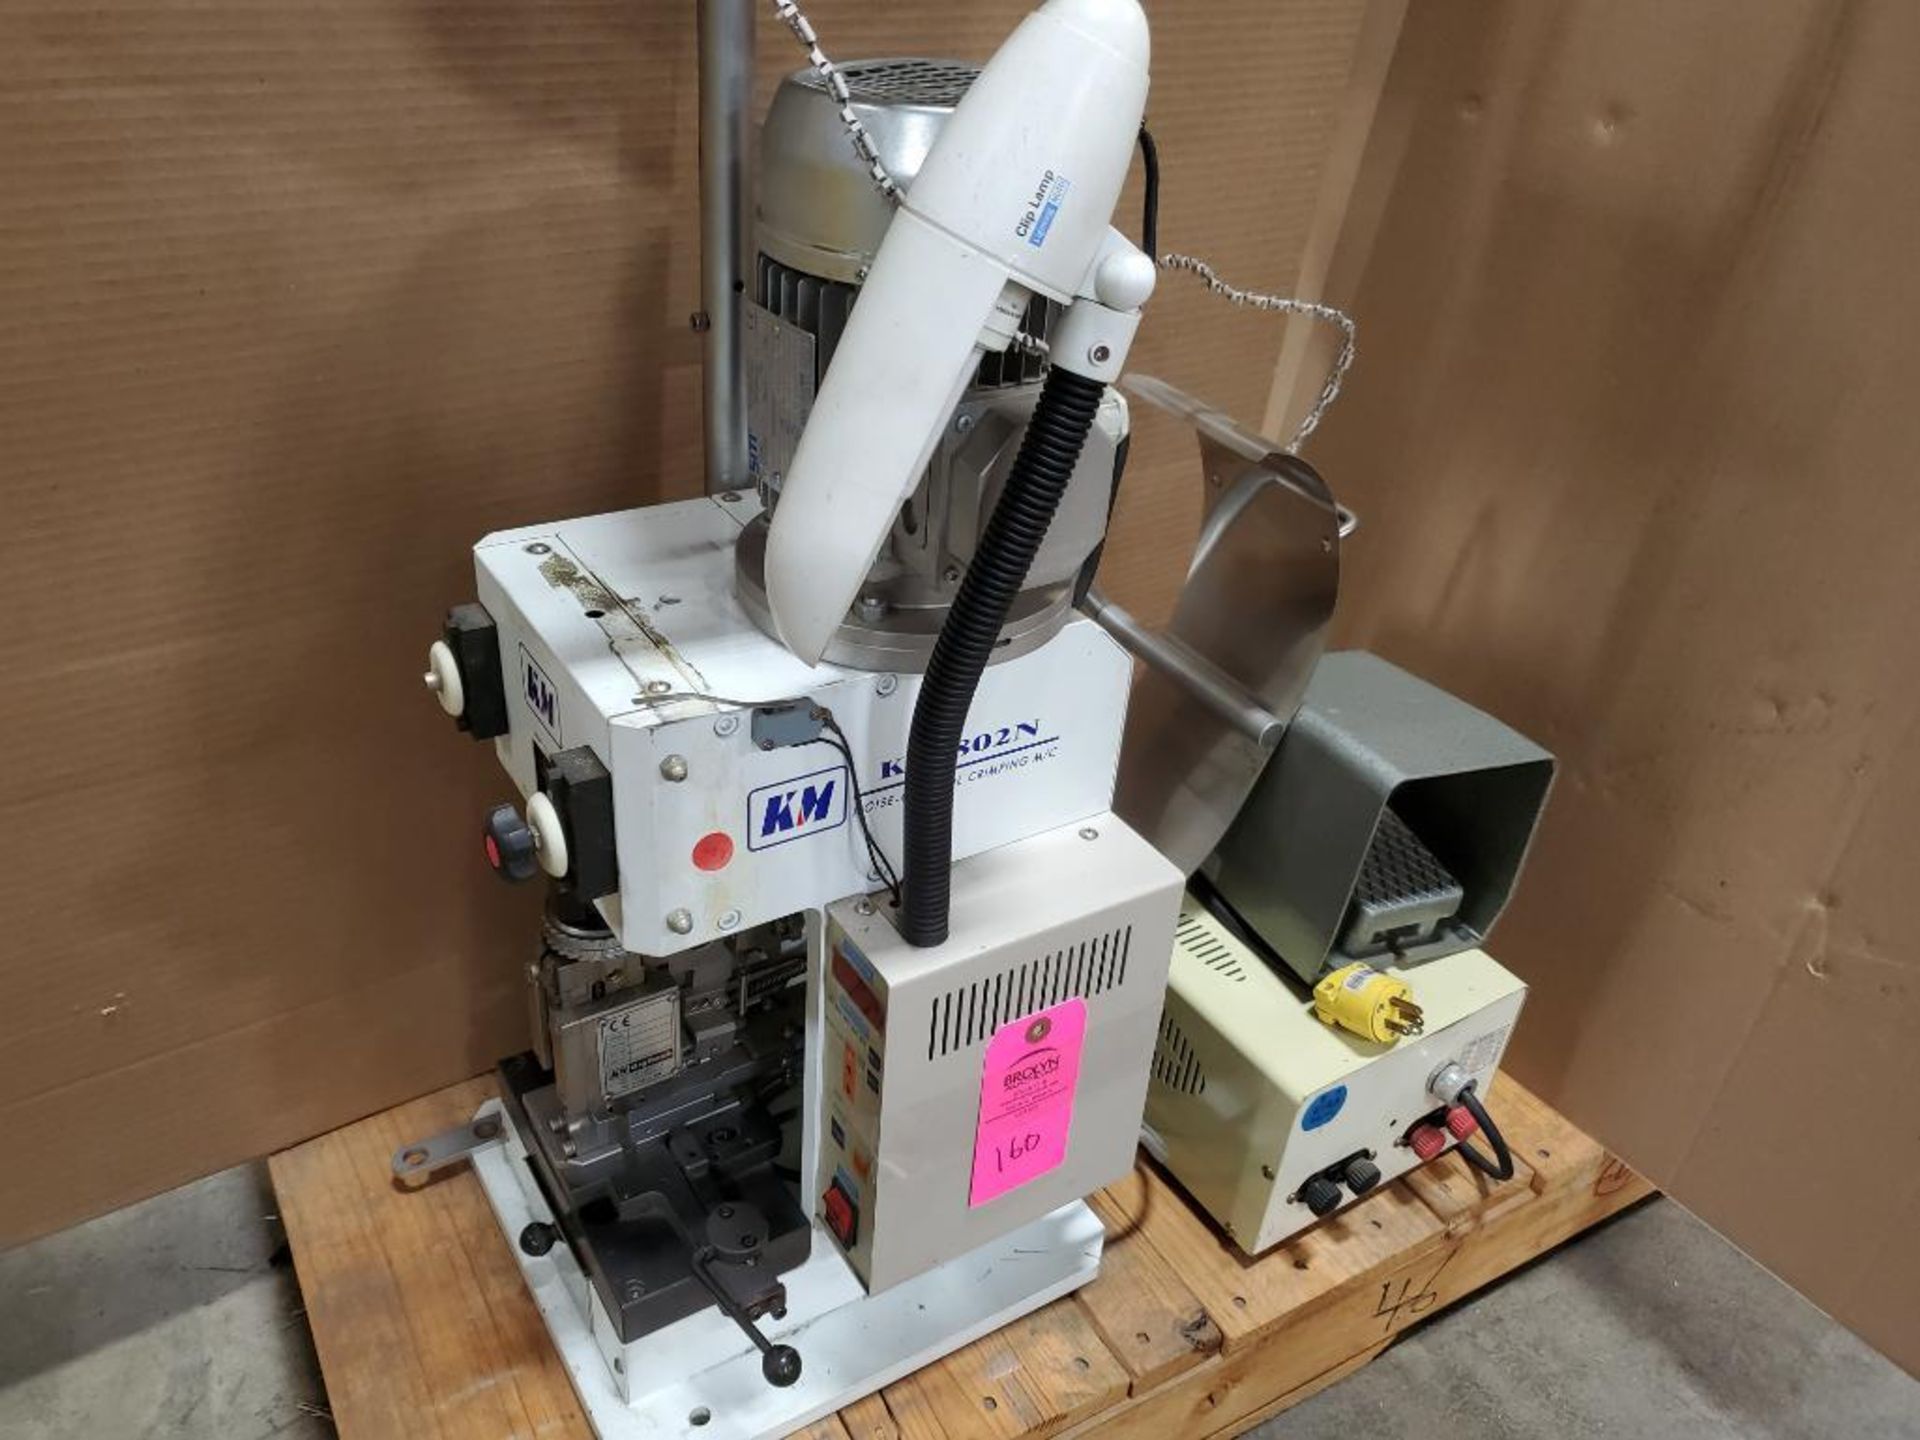 KM Digitech terminal crimping machine. Model KM-802N. Includes spade connector die as pictured. - Image 3 of 10